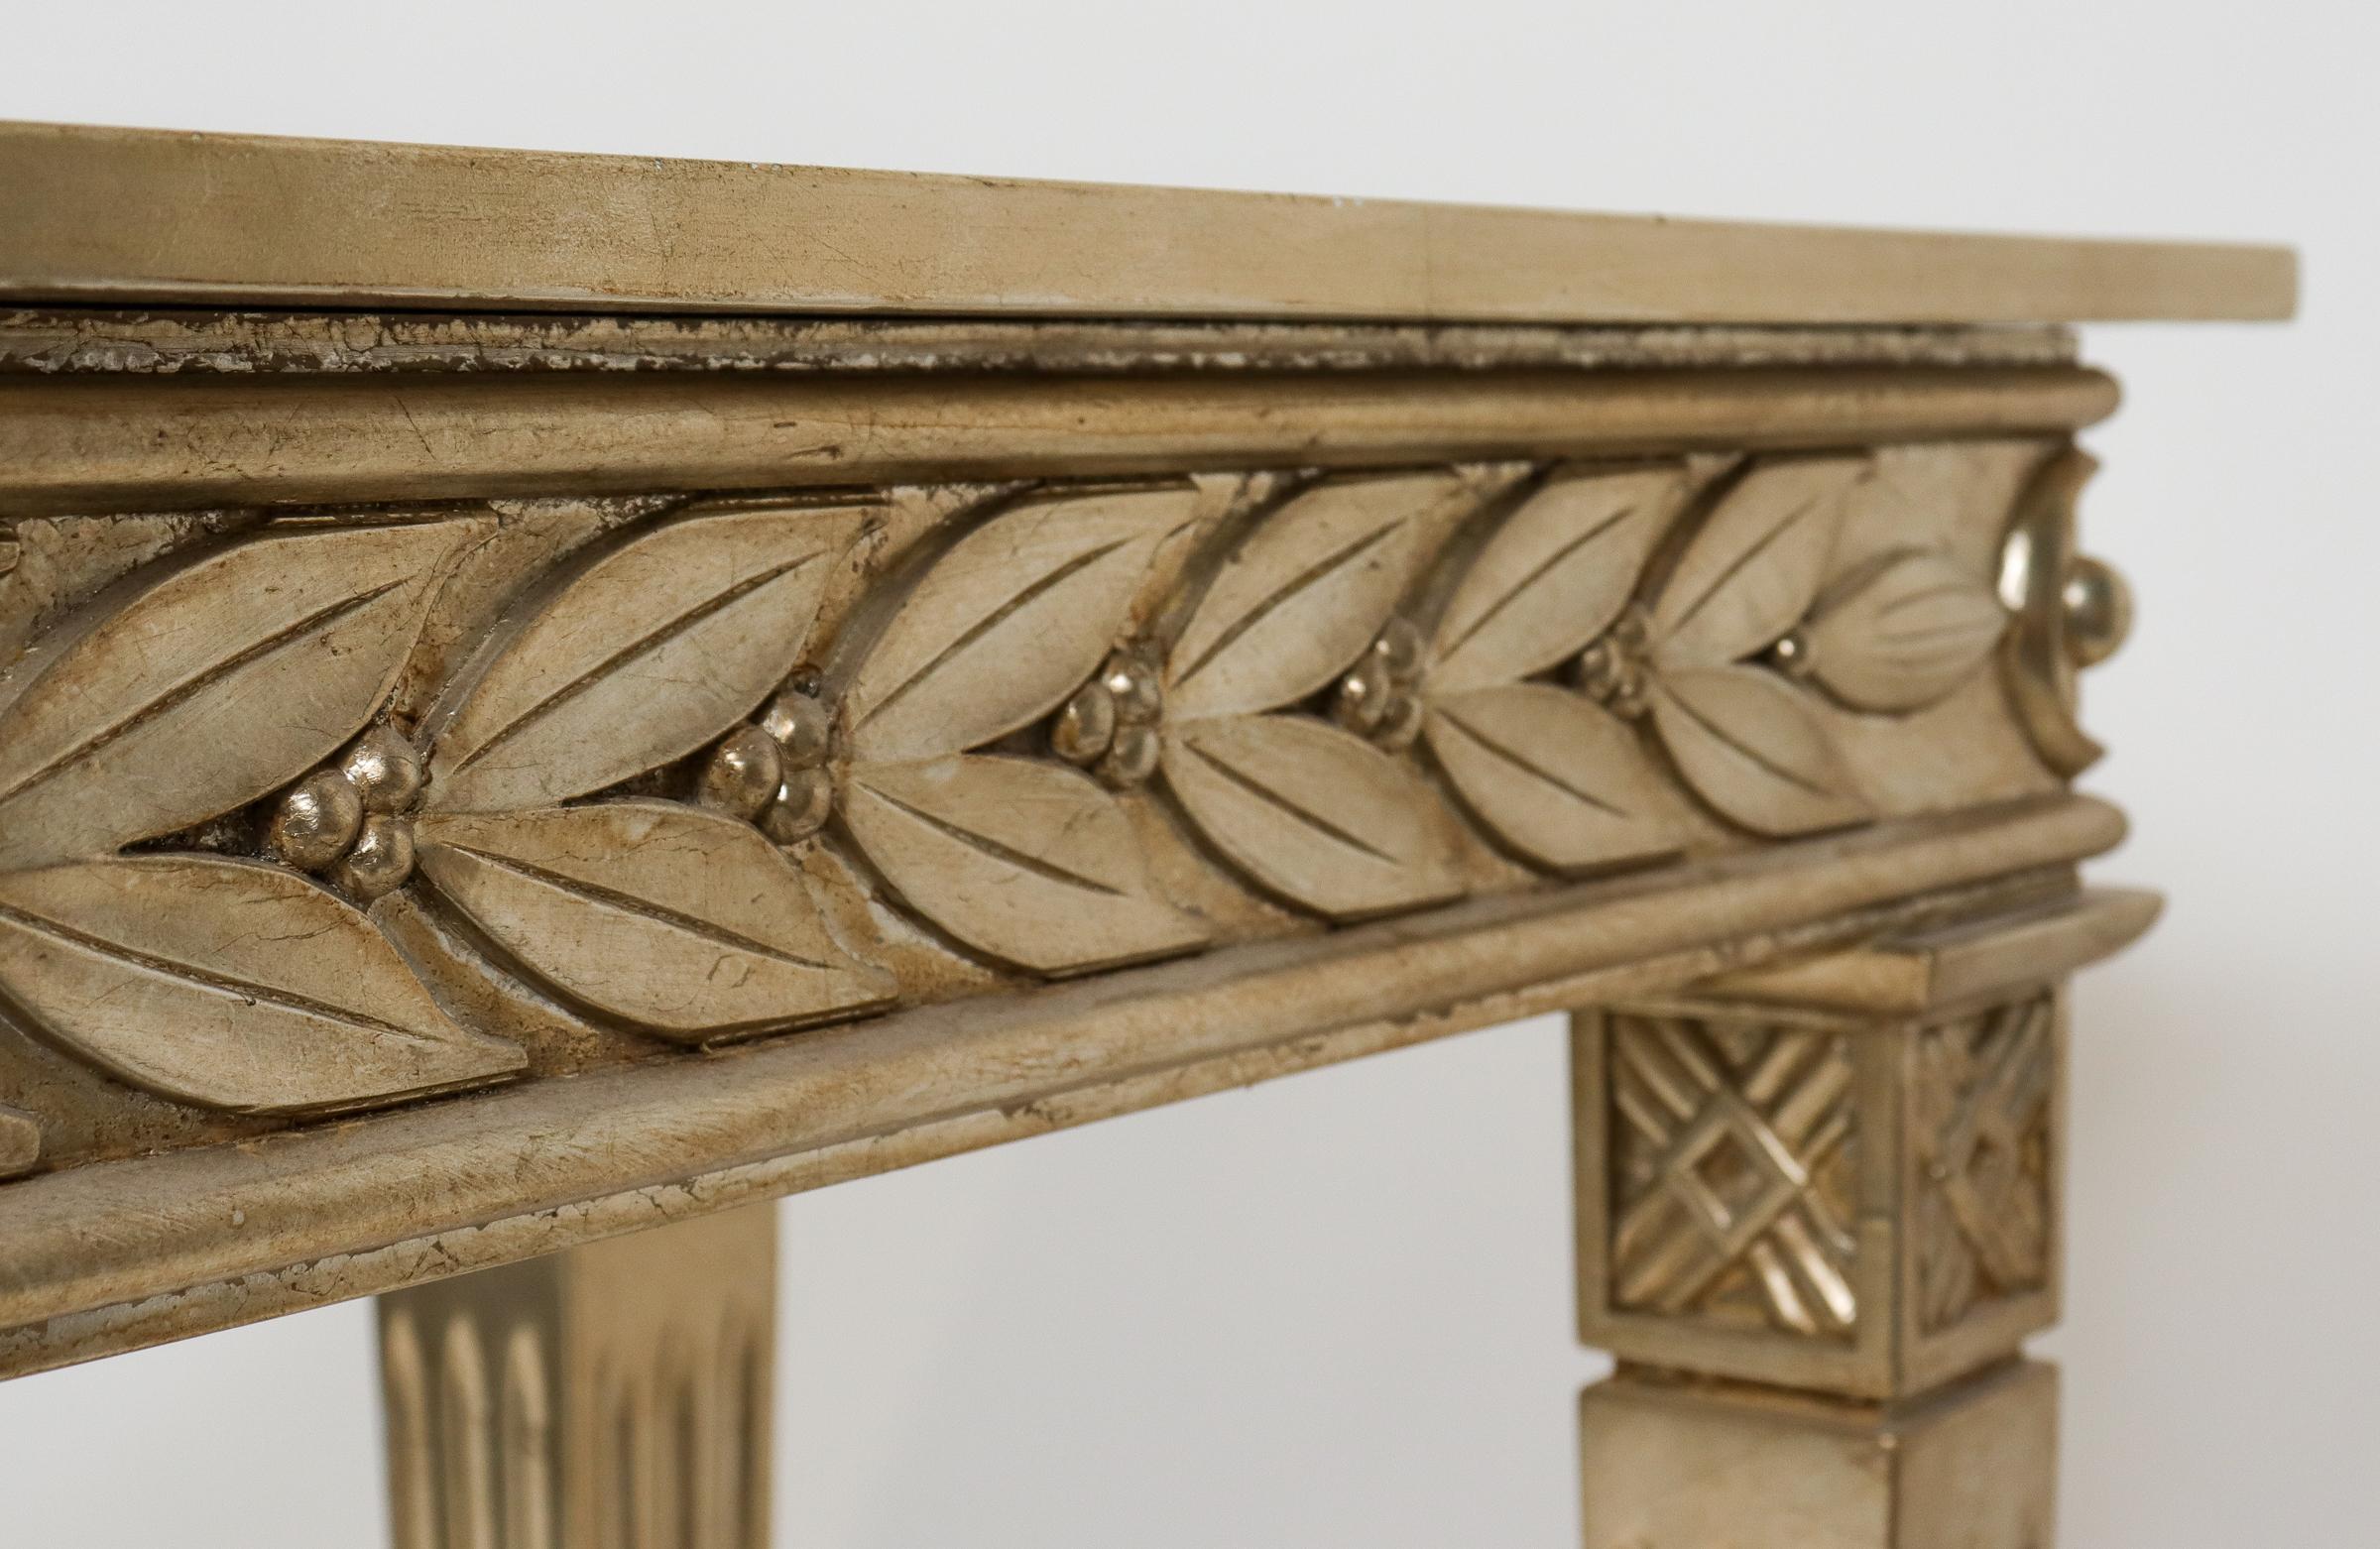 Neoclassical Revival Italian Neoclassical Manner Silver-Gilt Console Table